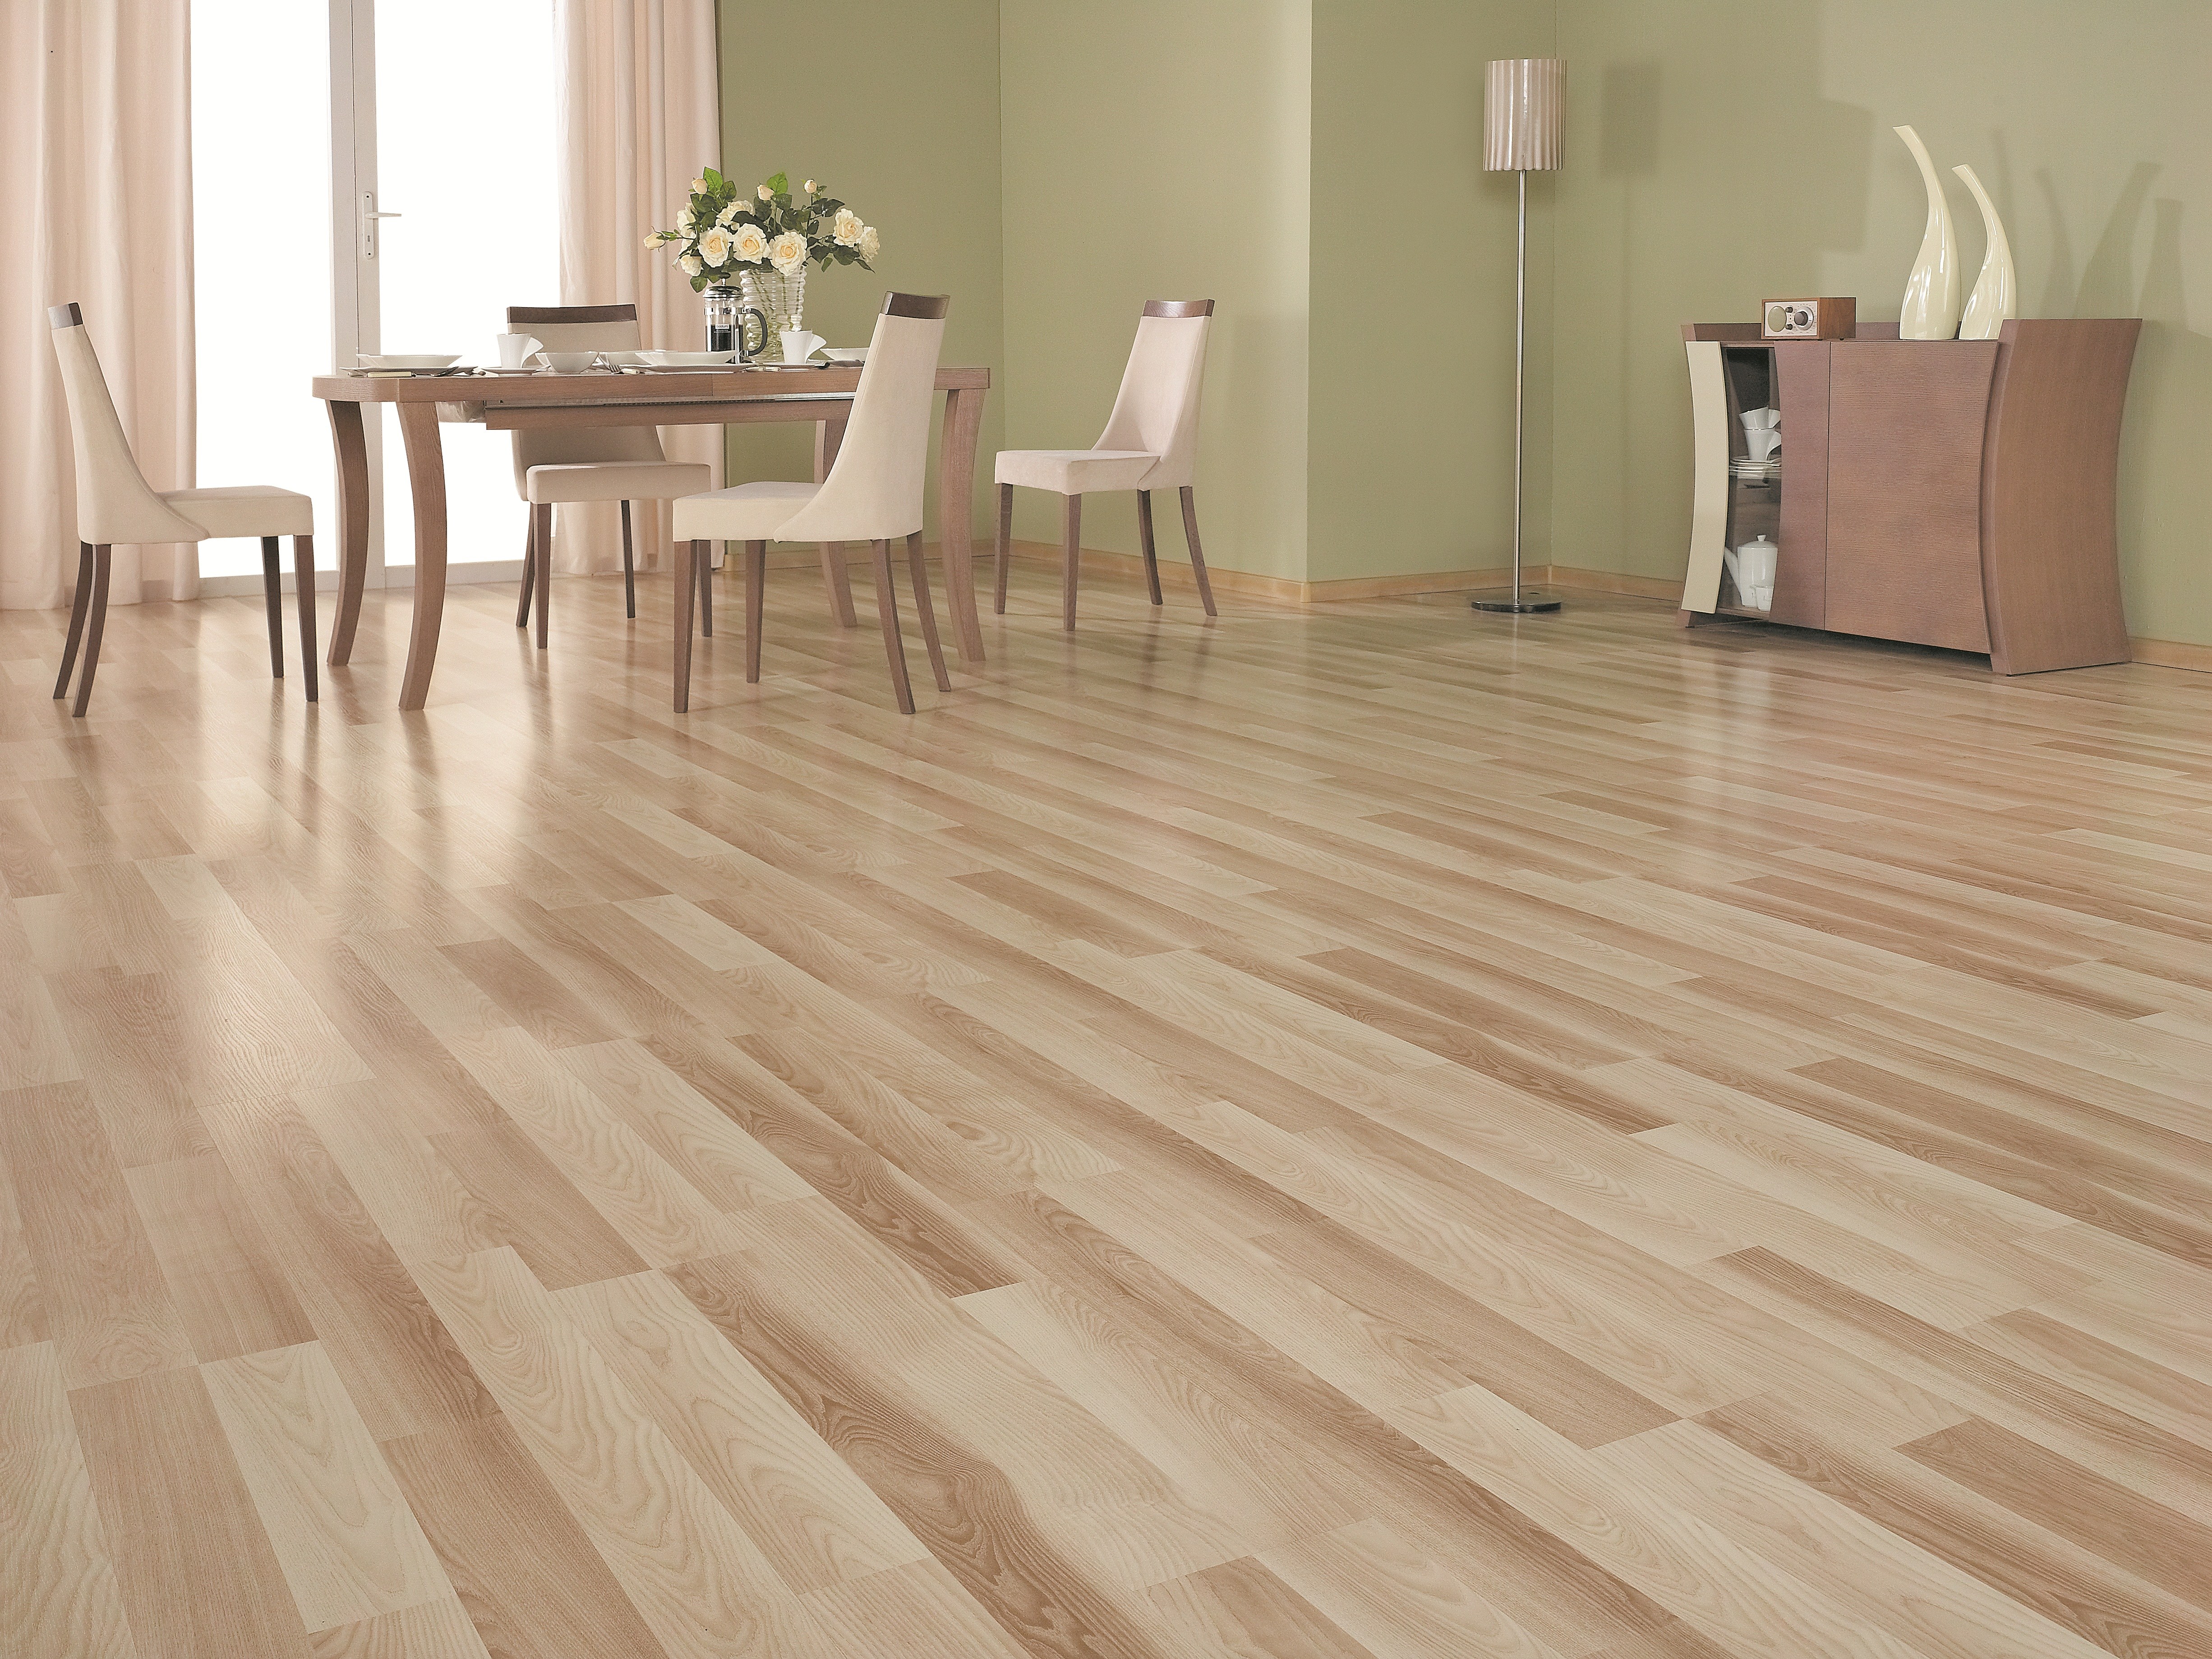 laminate flooring colors styles browse our laminate flooring collections and select the latest laminate  colors, styles EWBZTTW